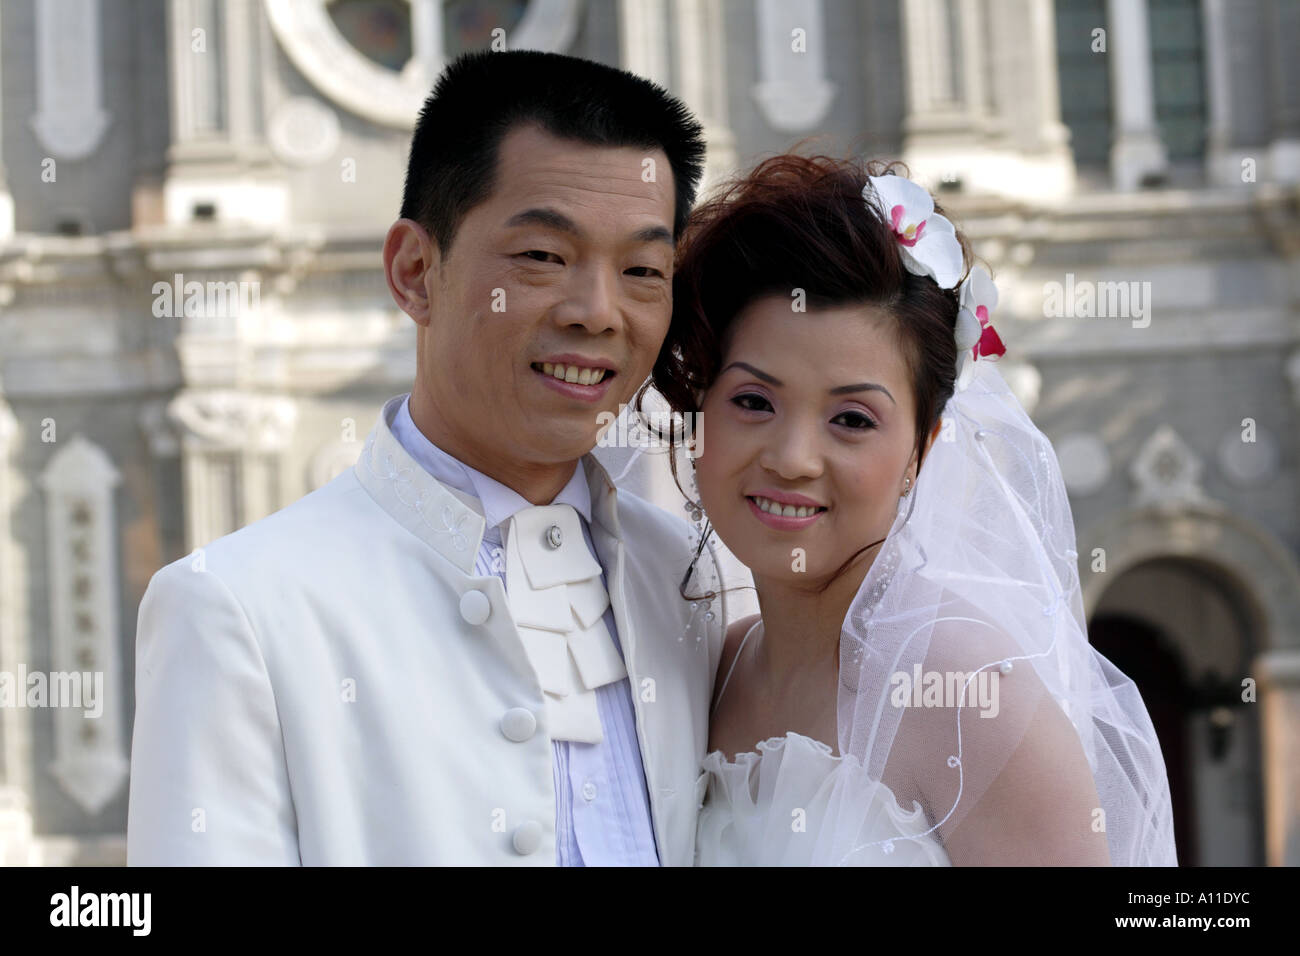 A bride in front of St. Joseph's Church in Beijing, China Stock Photo